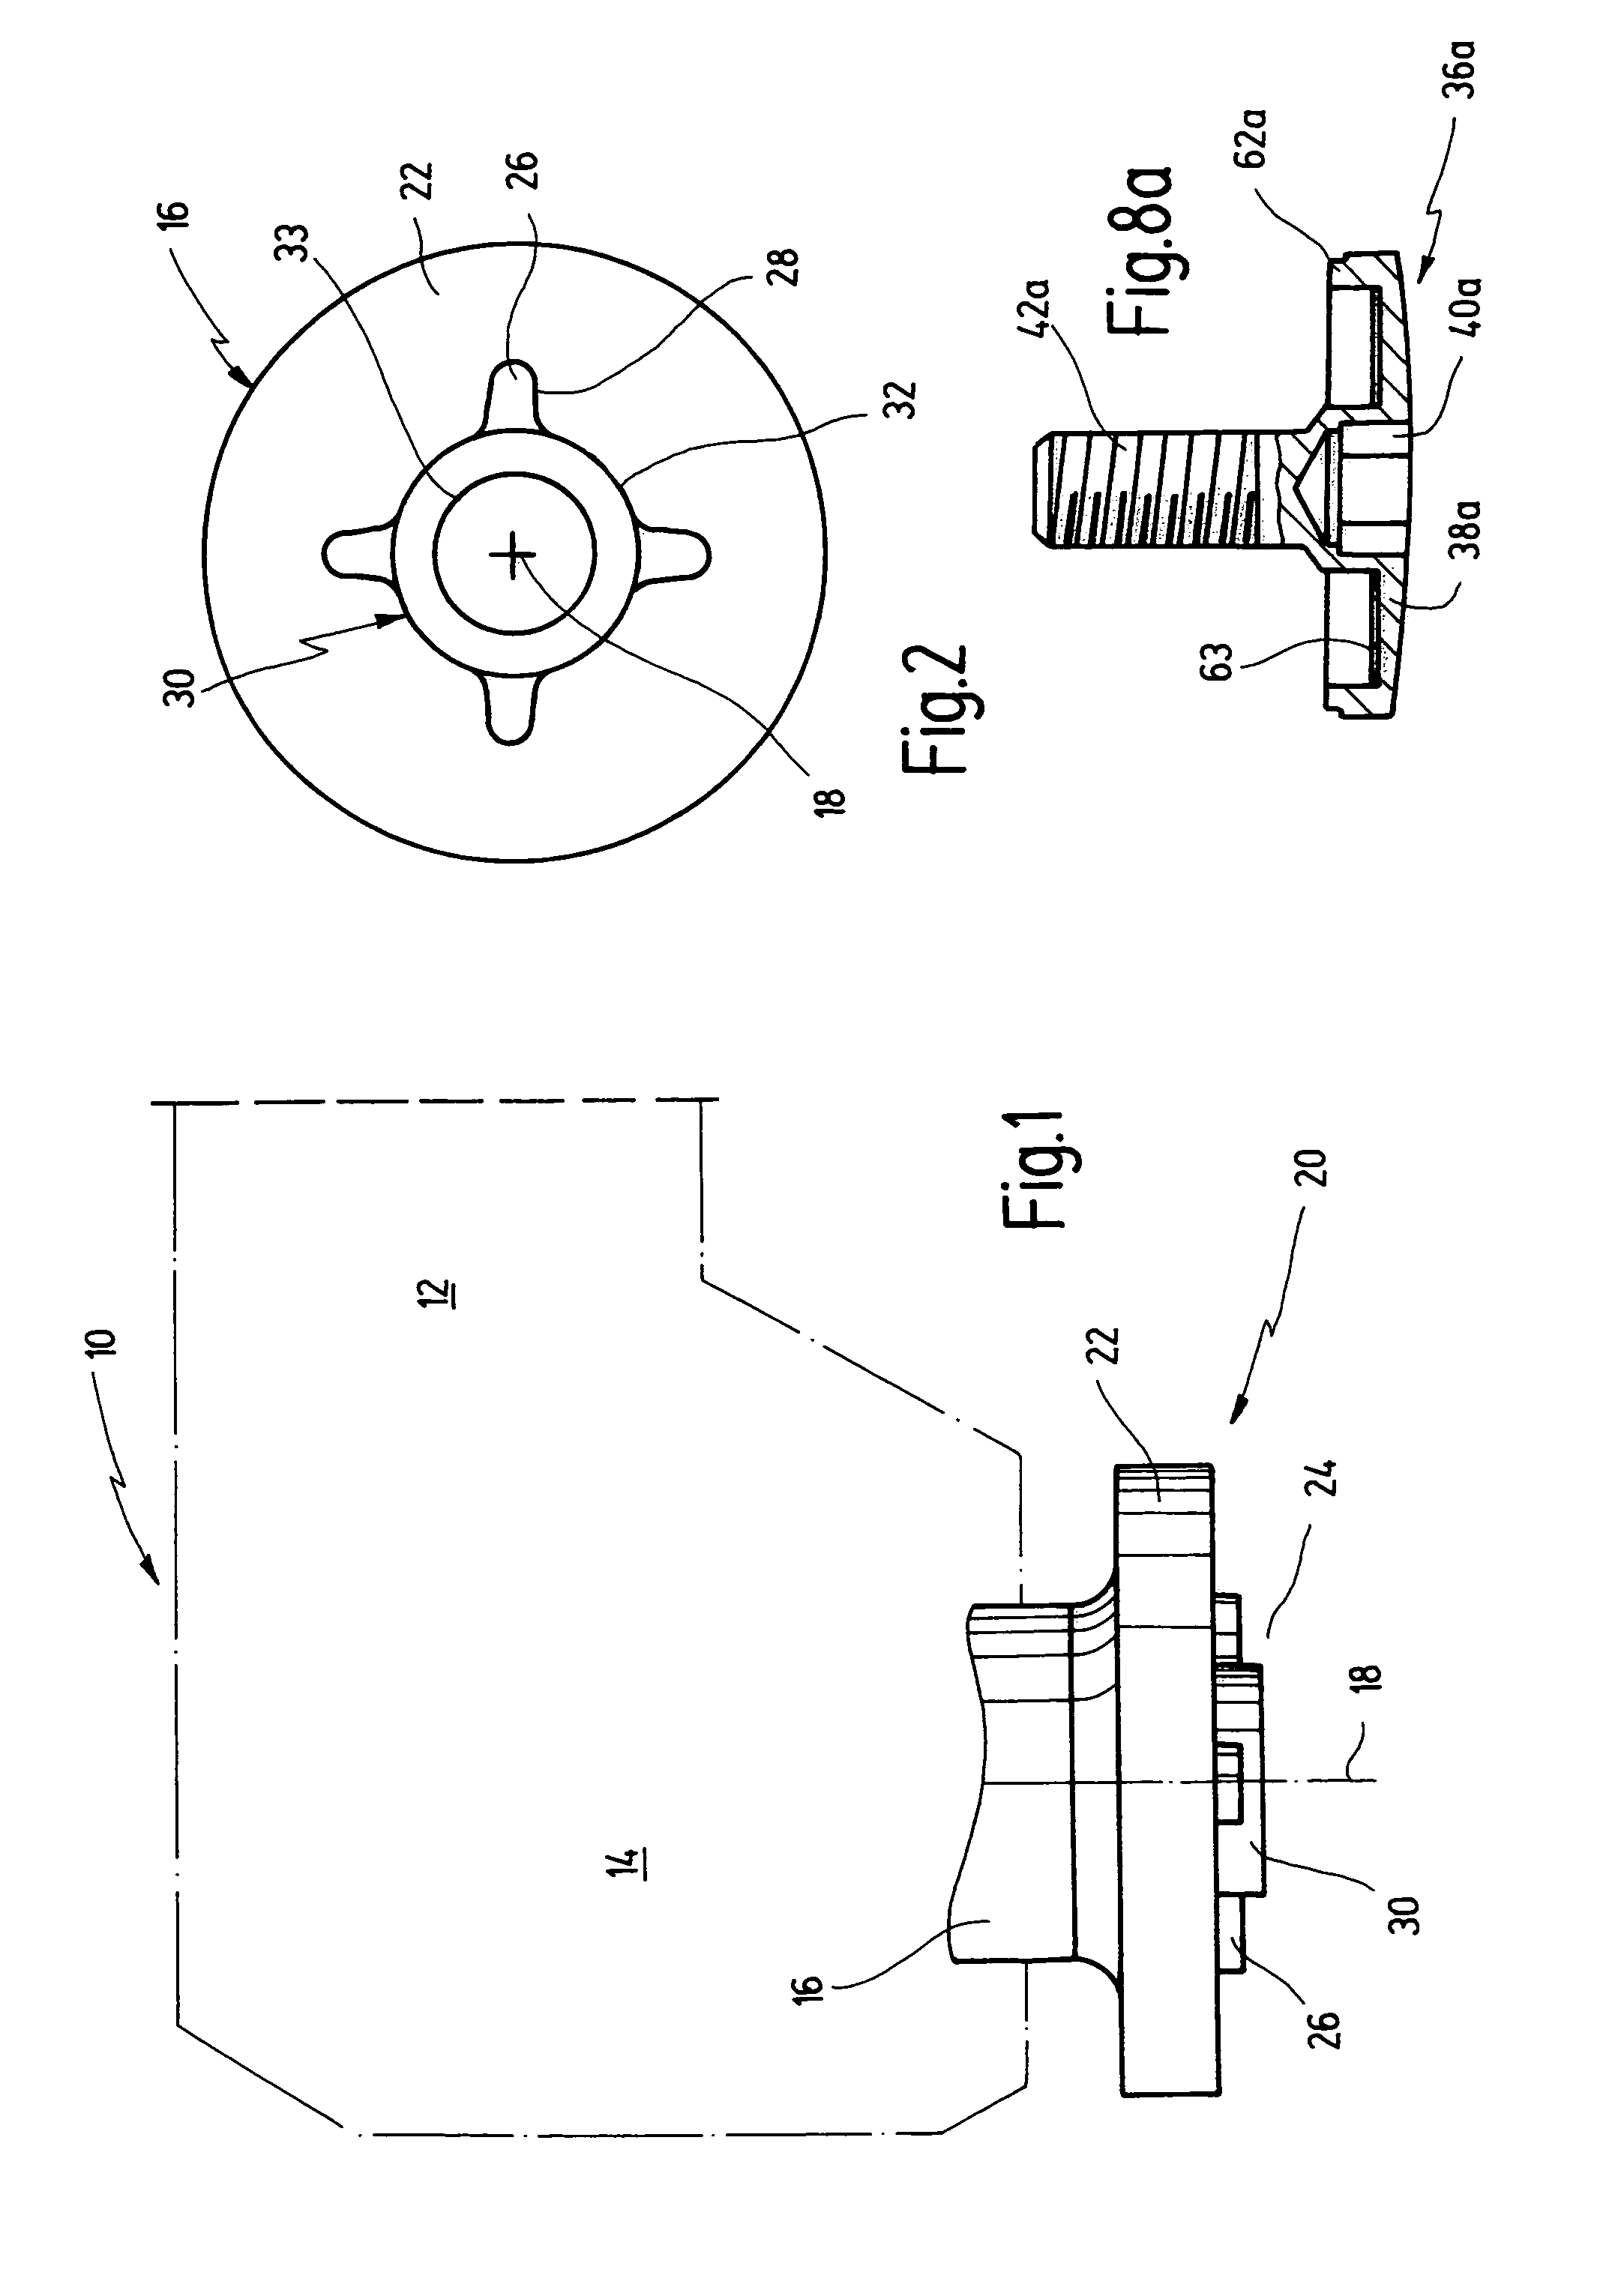 Power tool having a receptacle for securing a tool